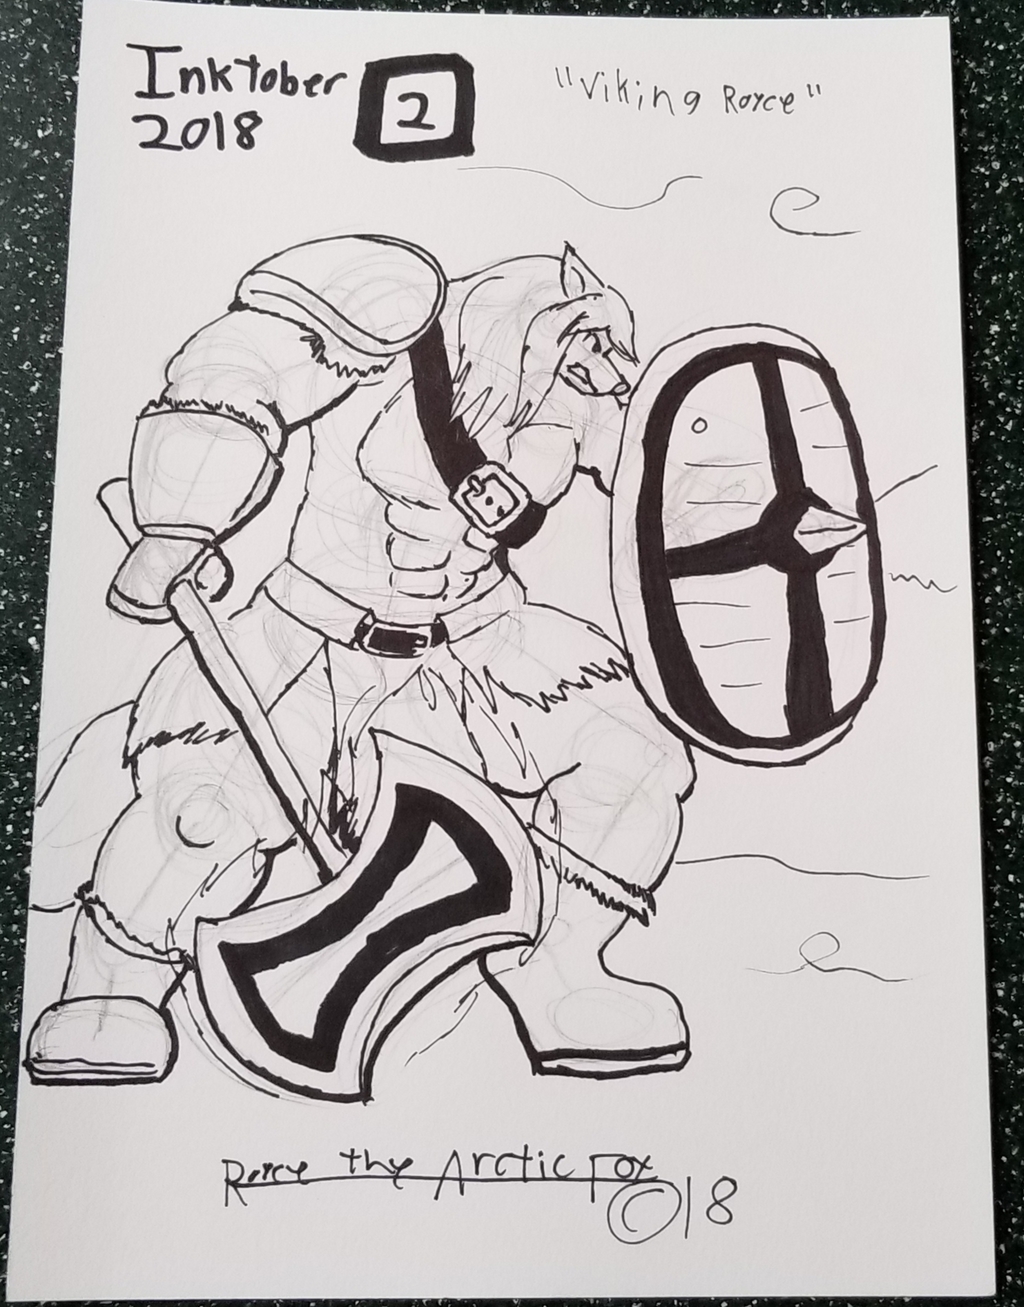 Most recent image: Inktober 2018 day 2 "Viking Royce."